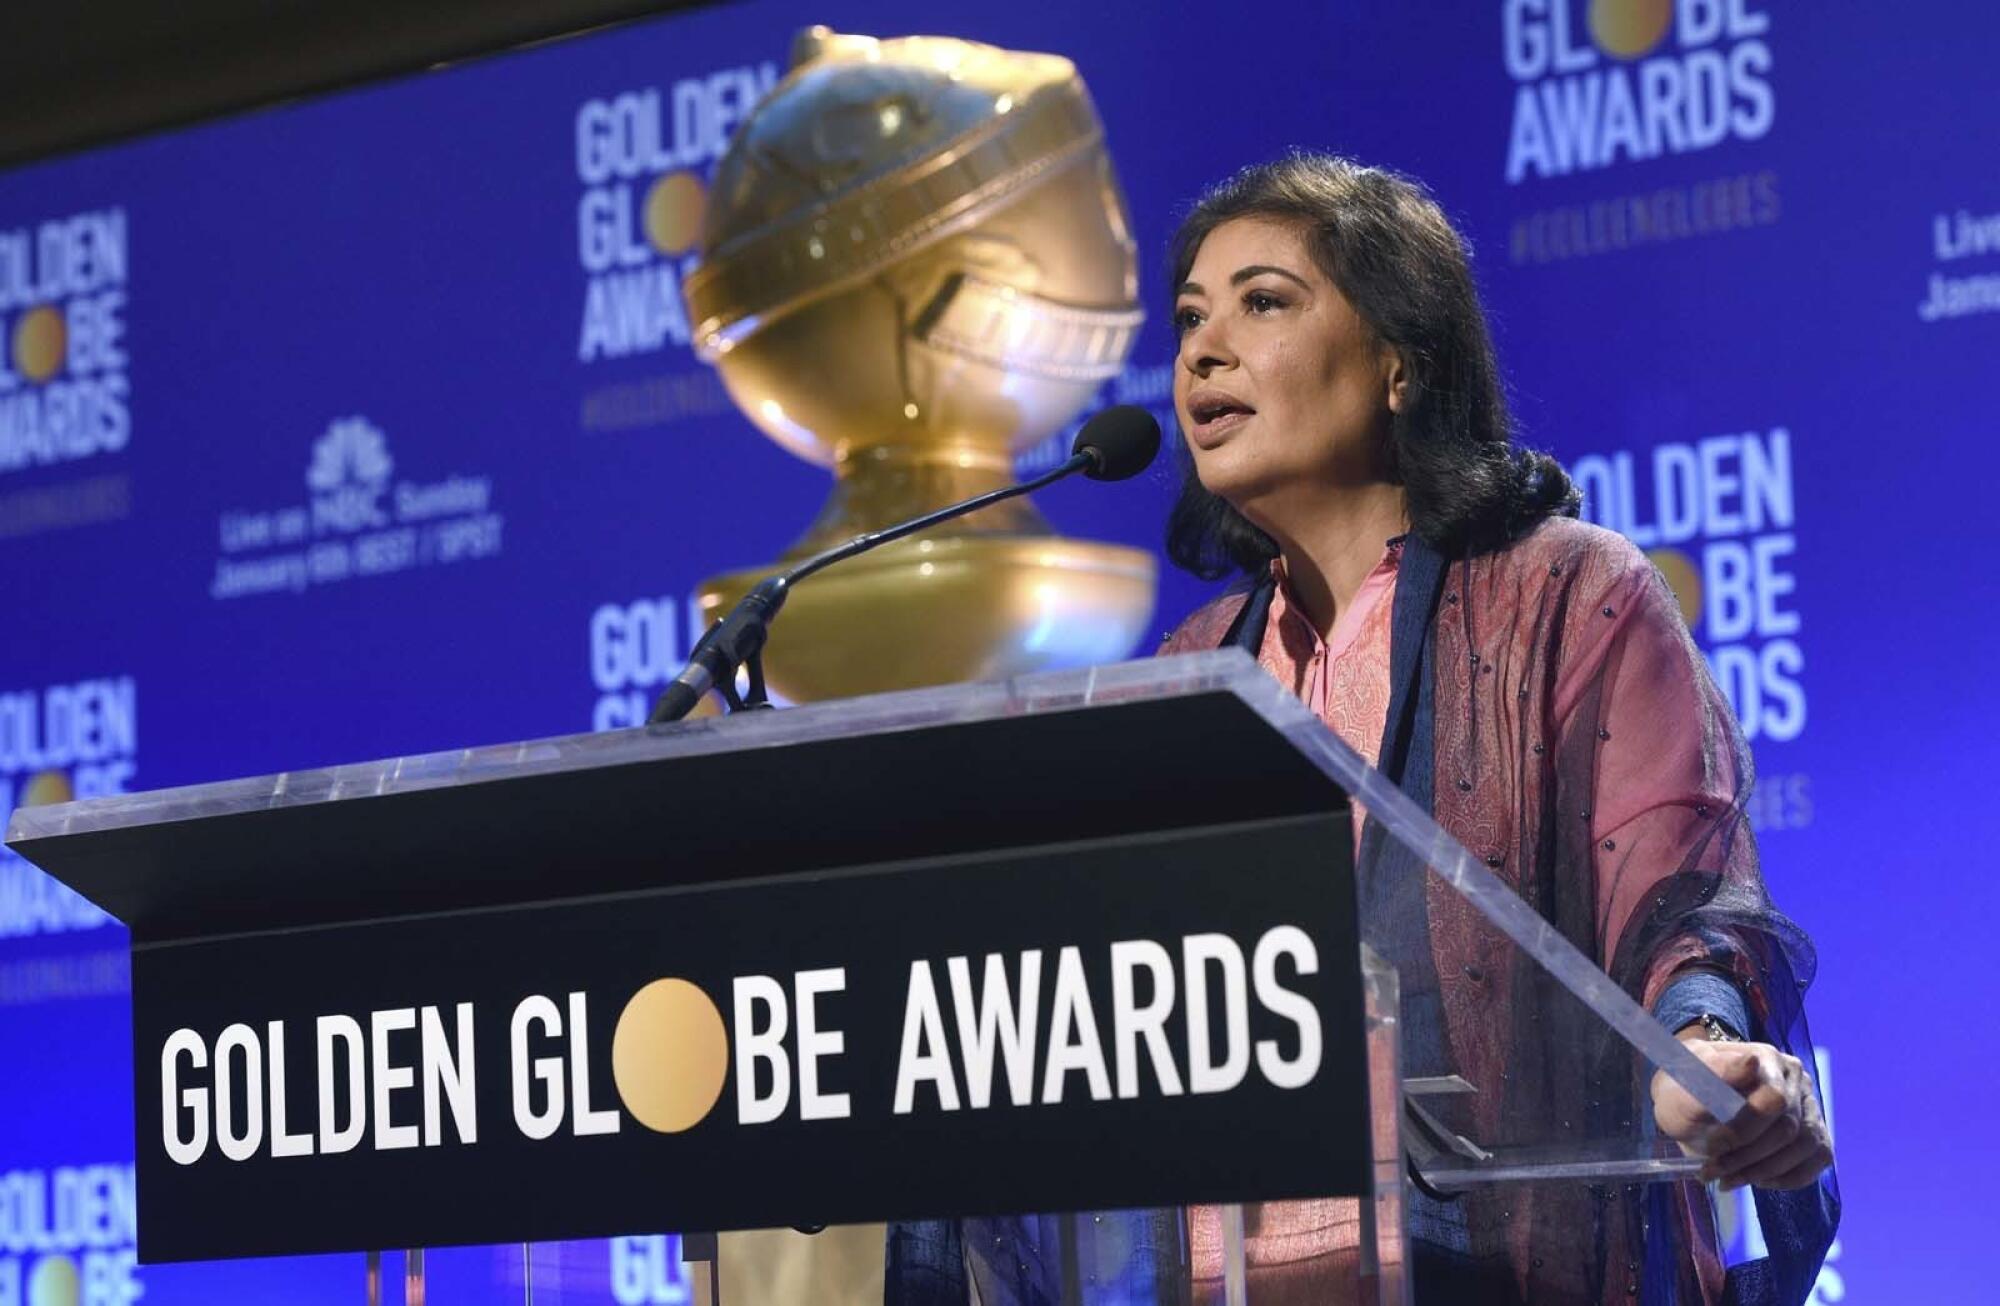 A woman speaks at a lectern with the words Golden Globe Awards on it in front of a replica of the award statuette